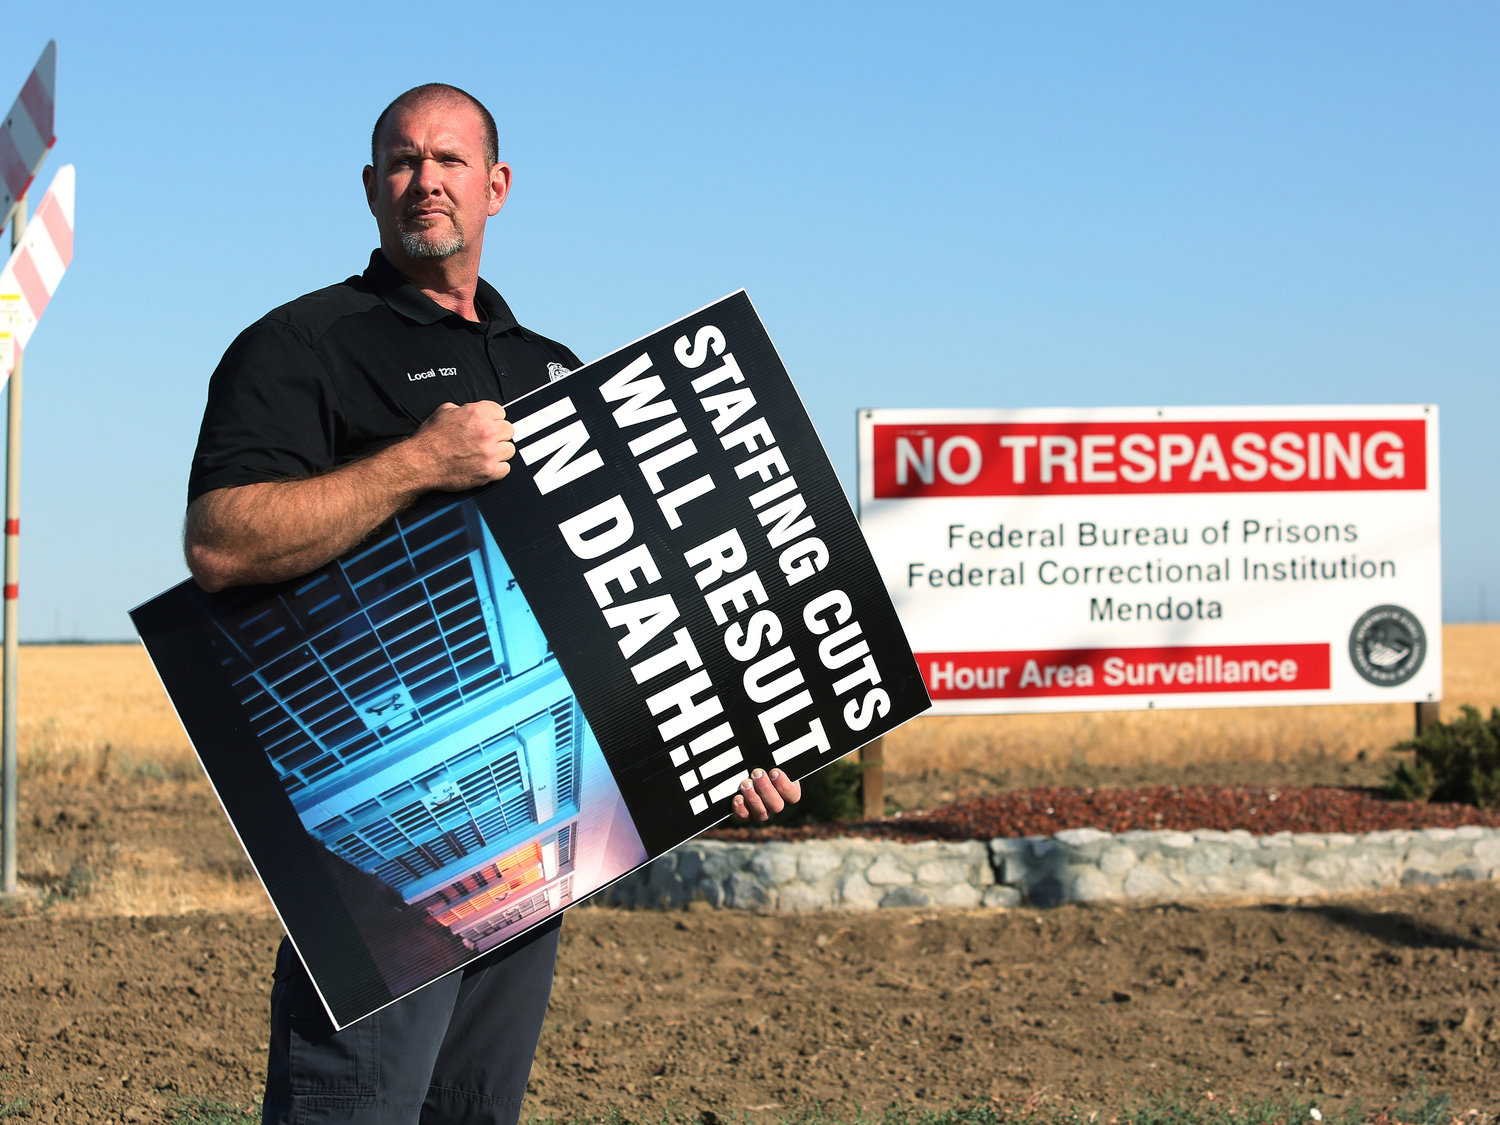 STAFF SHORTAGE — Aaron McGlothin, union president at the Federal Correctional Institution at Mendota, poses for a photo while leading a protest against staffing shortages, near the prison entrance in Mendota, Calif., Monday.    (AP)